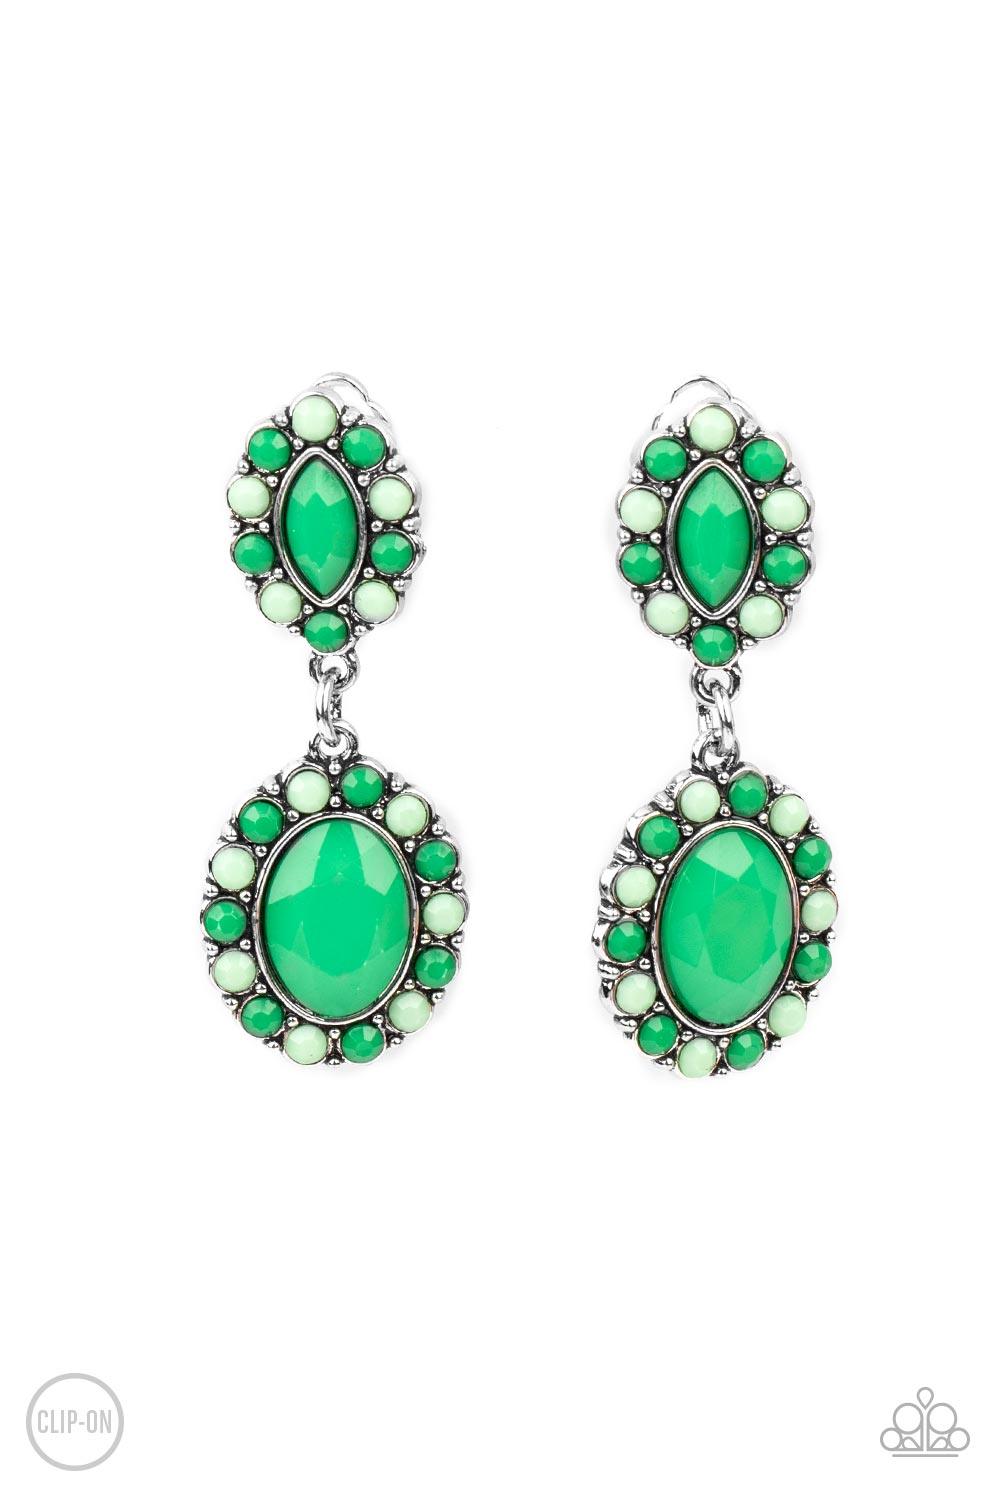 Paparazzi Accessories Positively Pampered - Green *Clip-On Bordered in dainty Mint and Green Ash beads, a pair of marquise and oval Mint beads delicately link into a colorful lure for a fresh pop of color. Earring attaches to a standard clip-on fitting. S